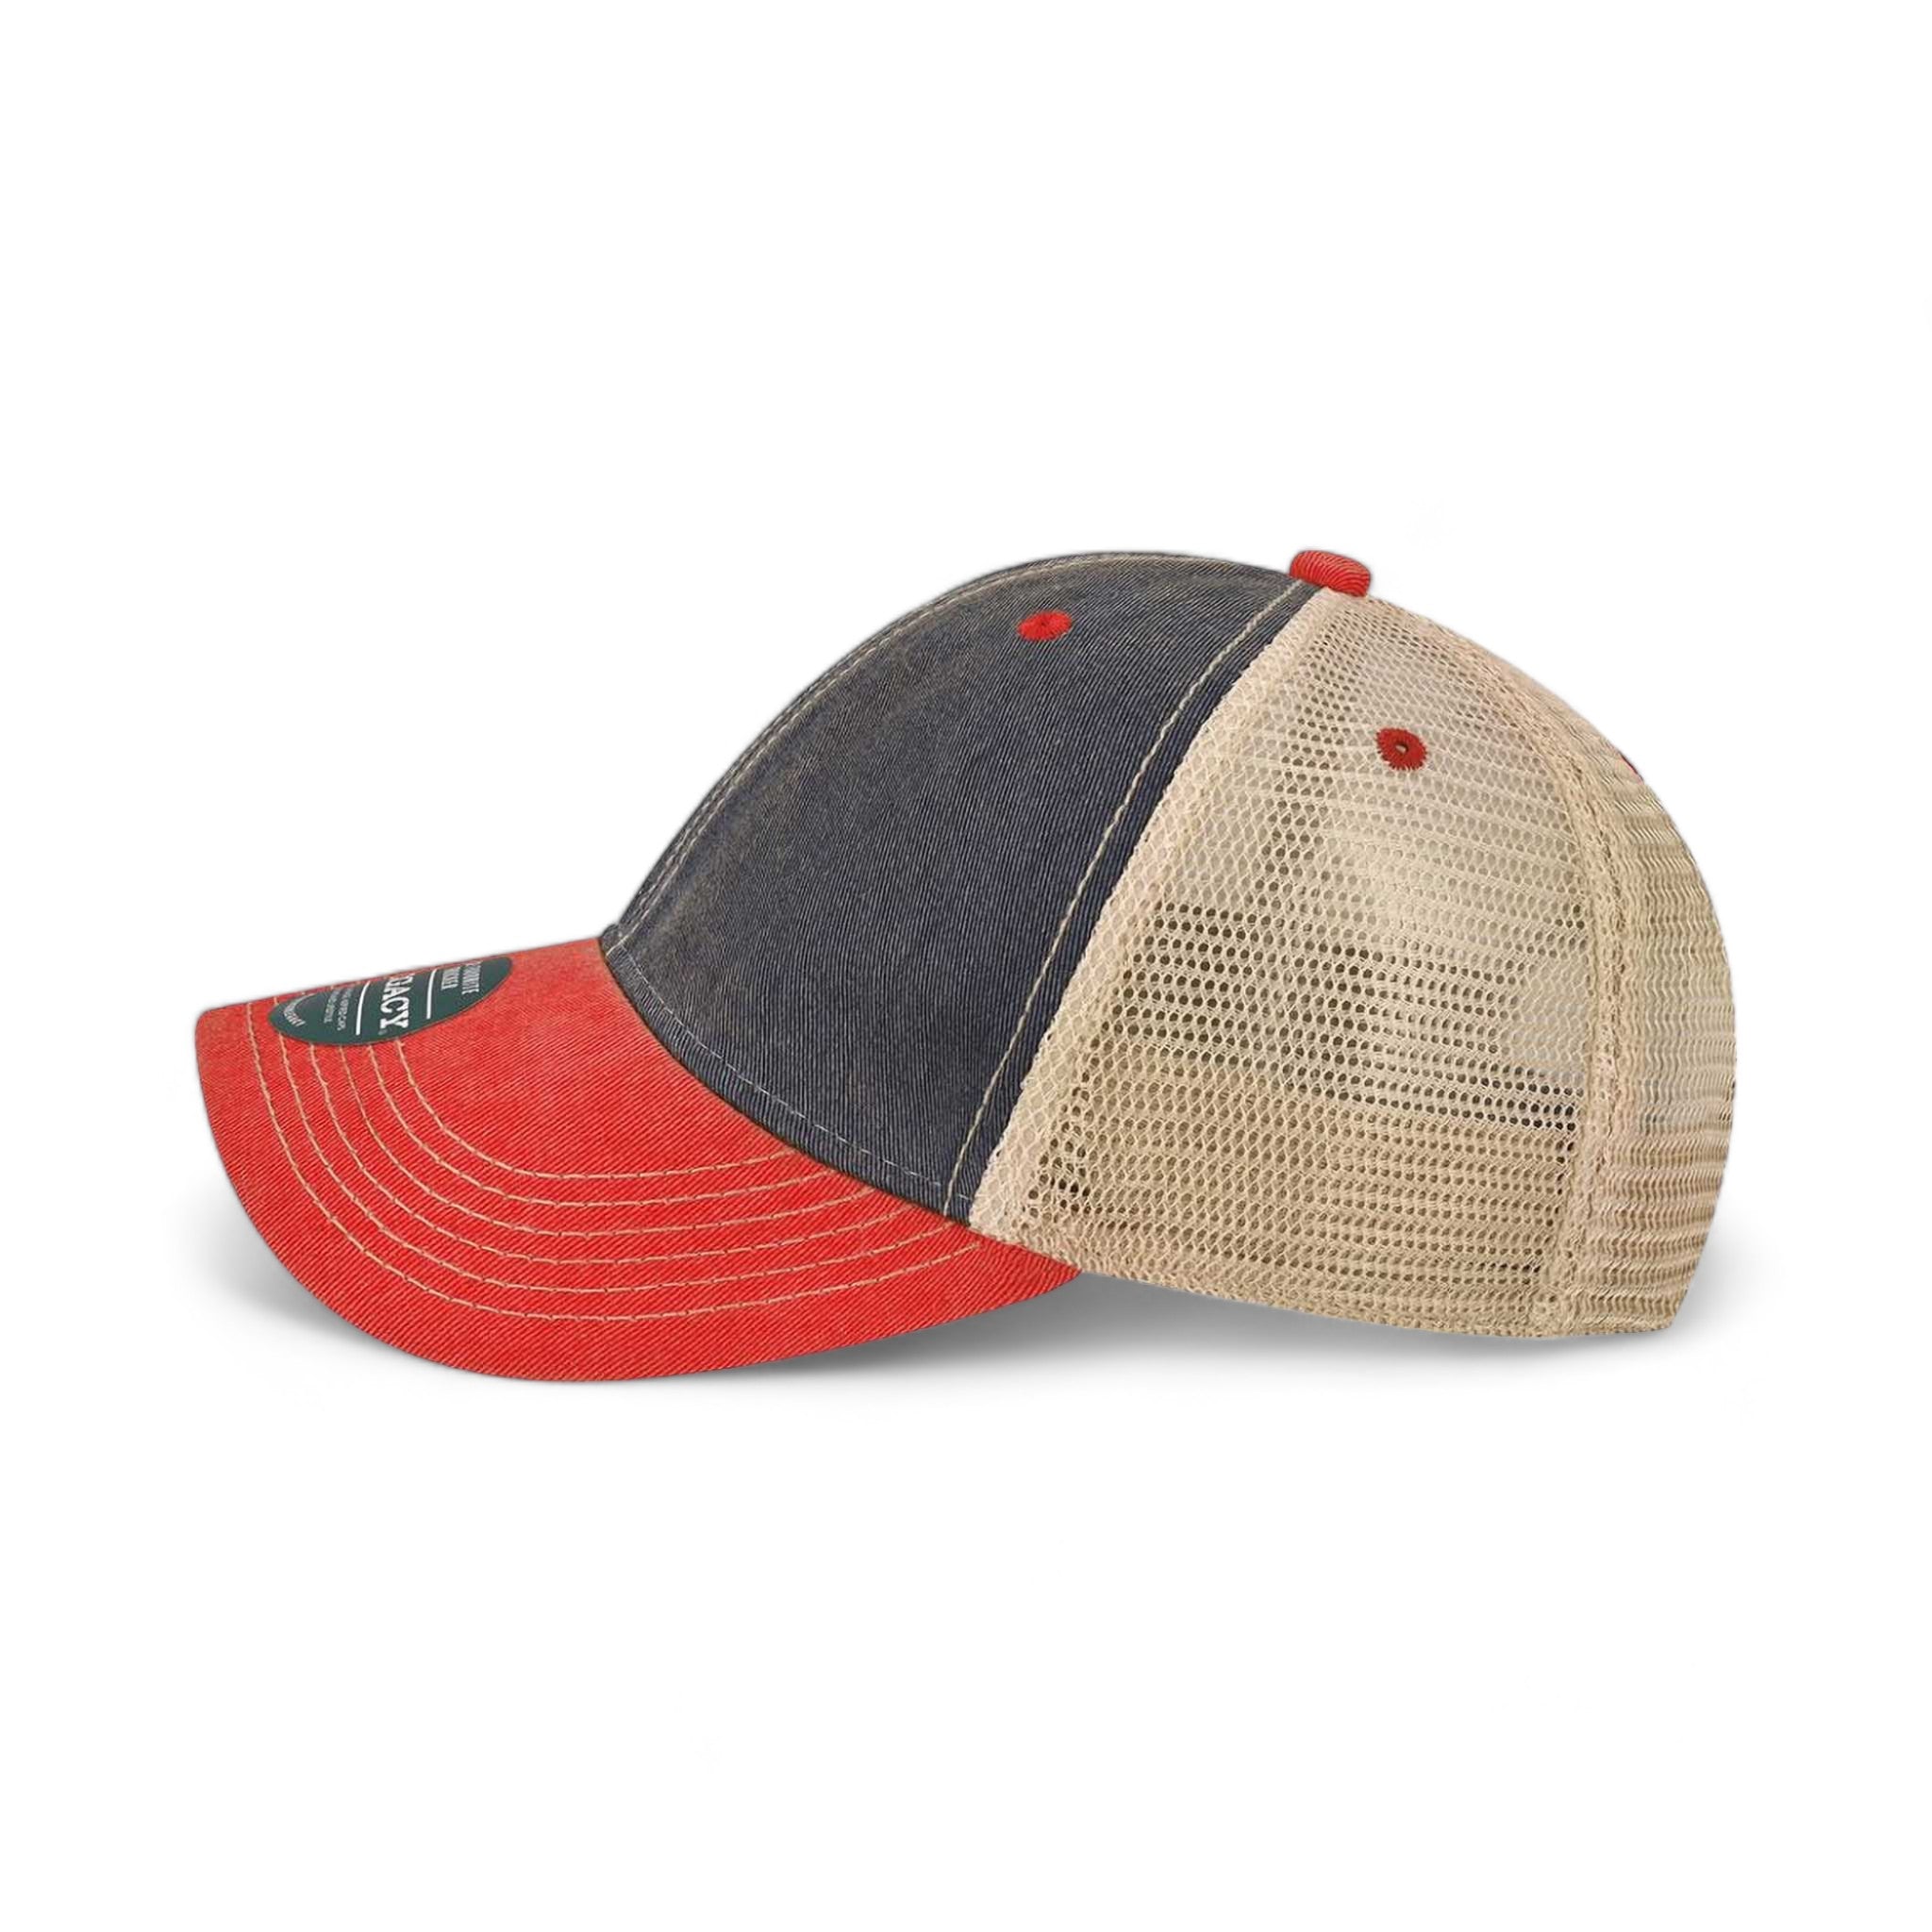 Side view of LEGACY OFAY custom hat in navy, scarlet red and khaki